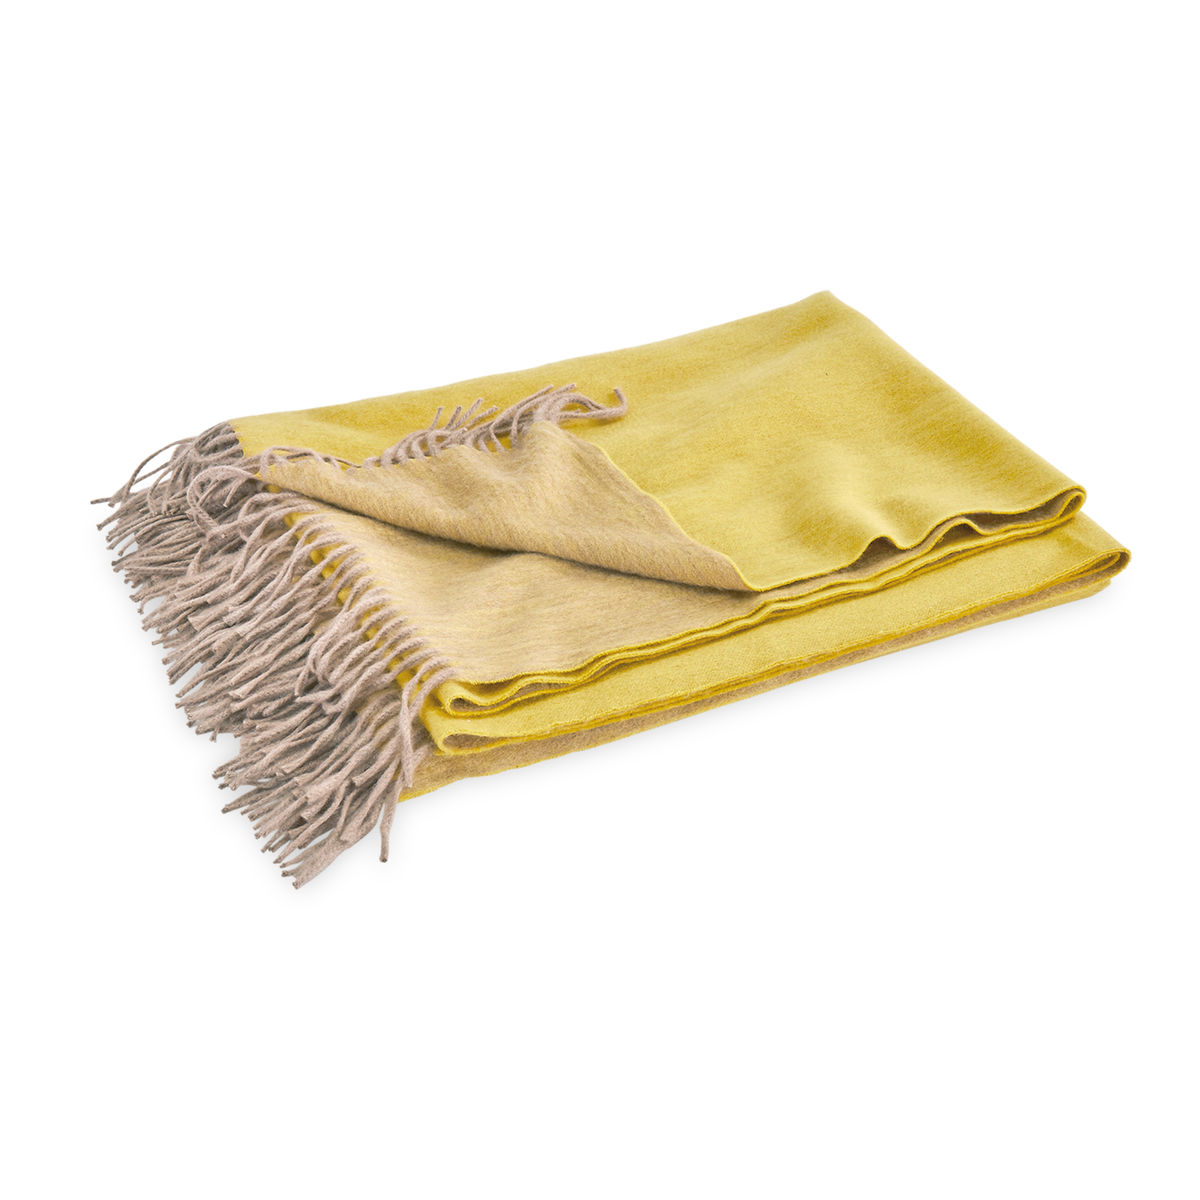 Folded Matouk Paley Throws in Yellow and Natural Color